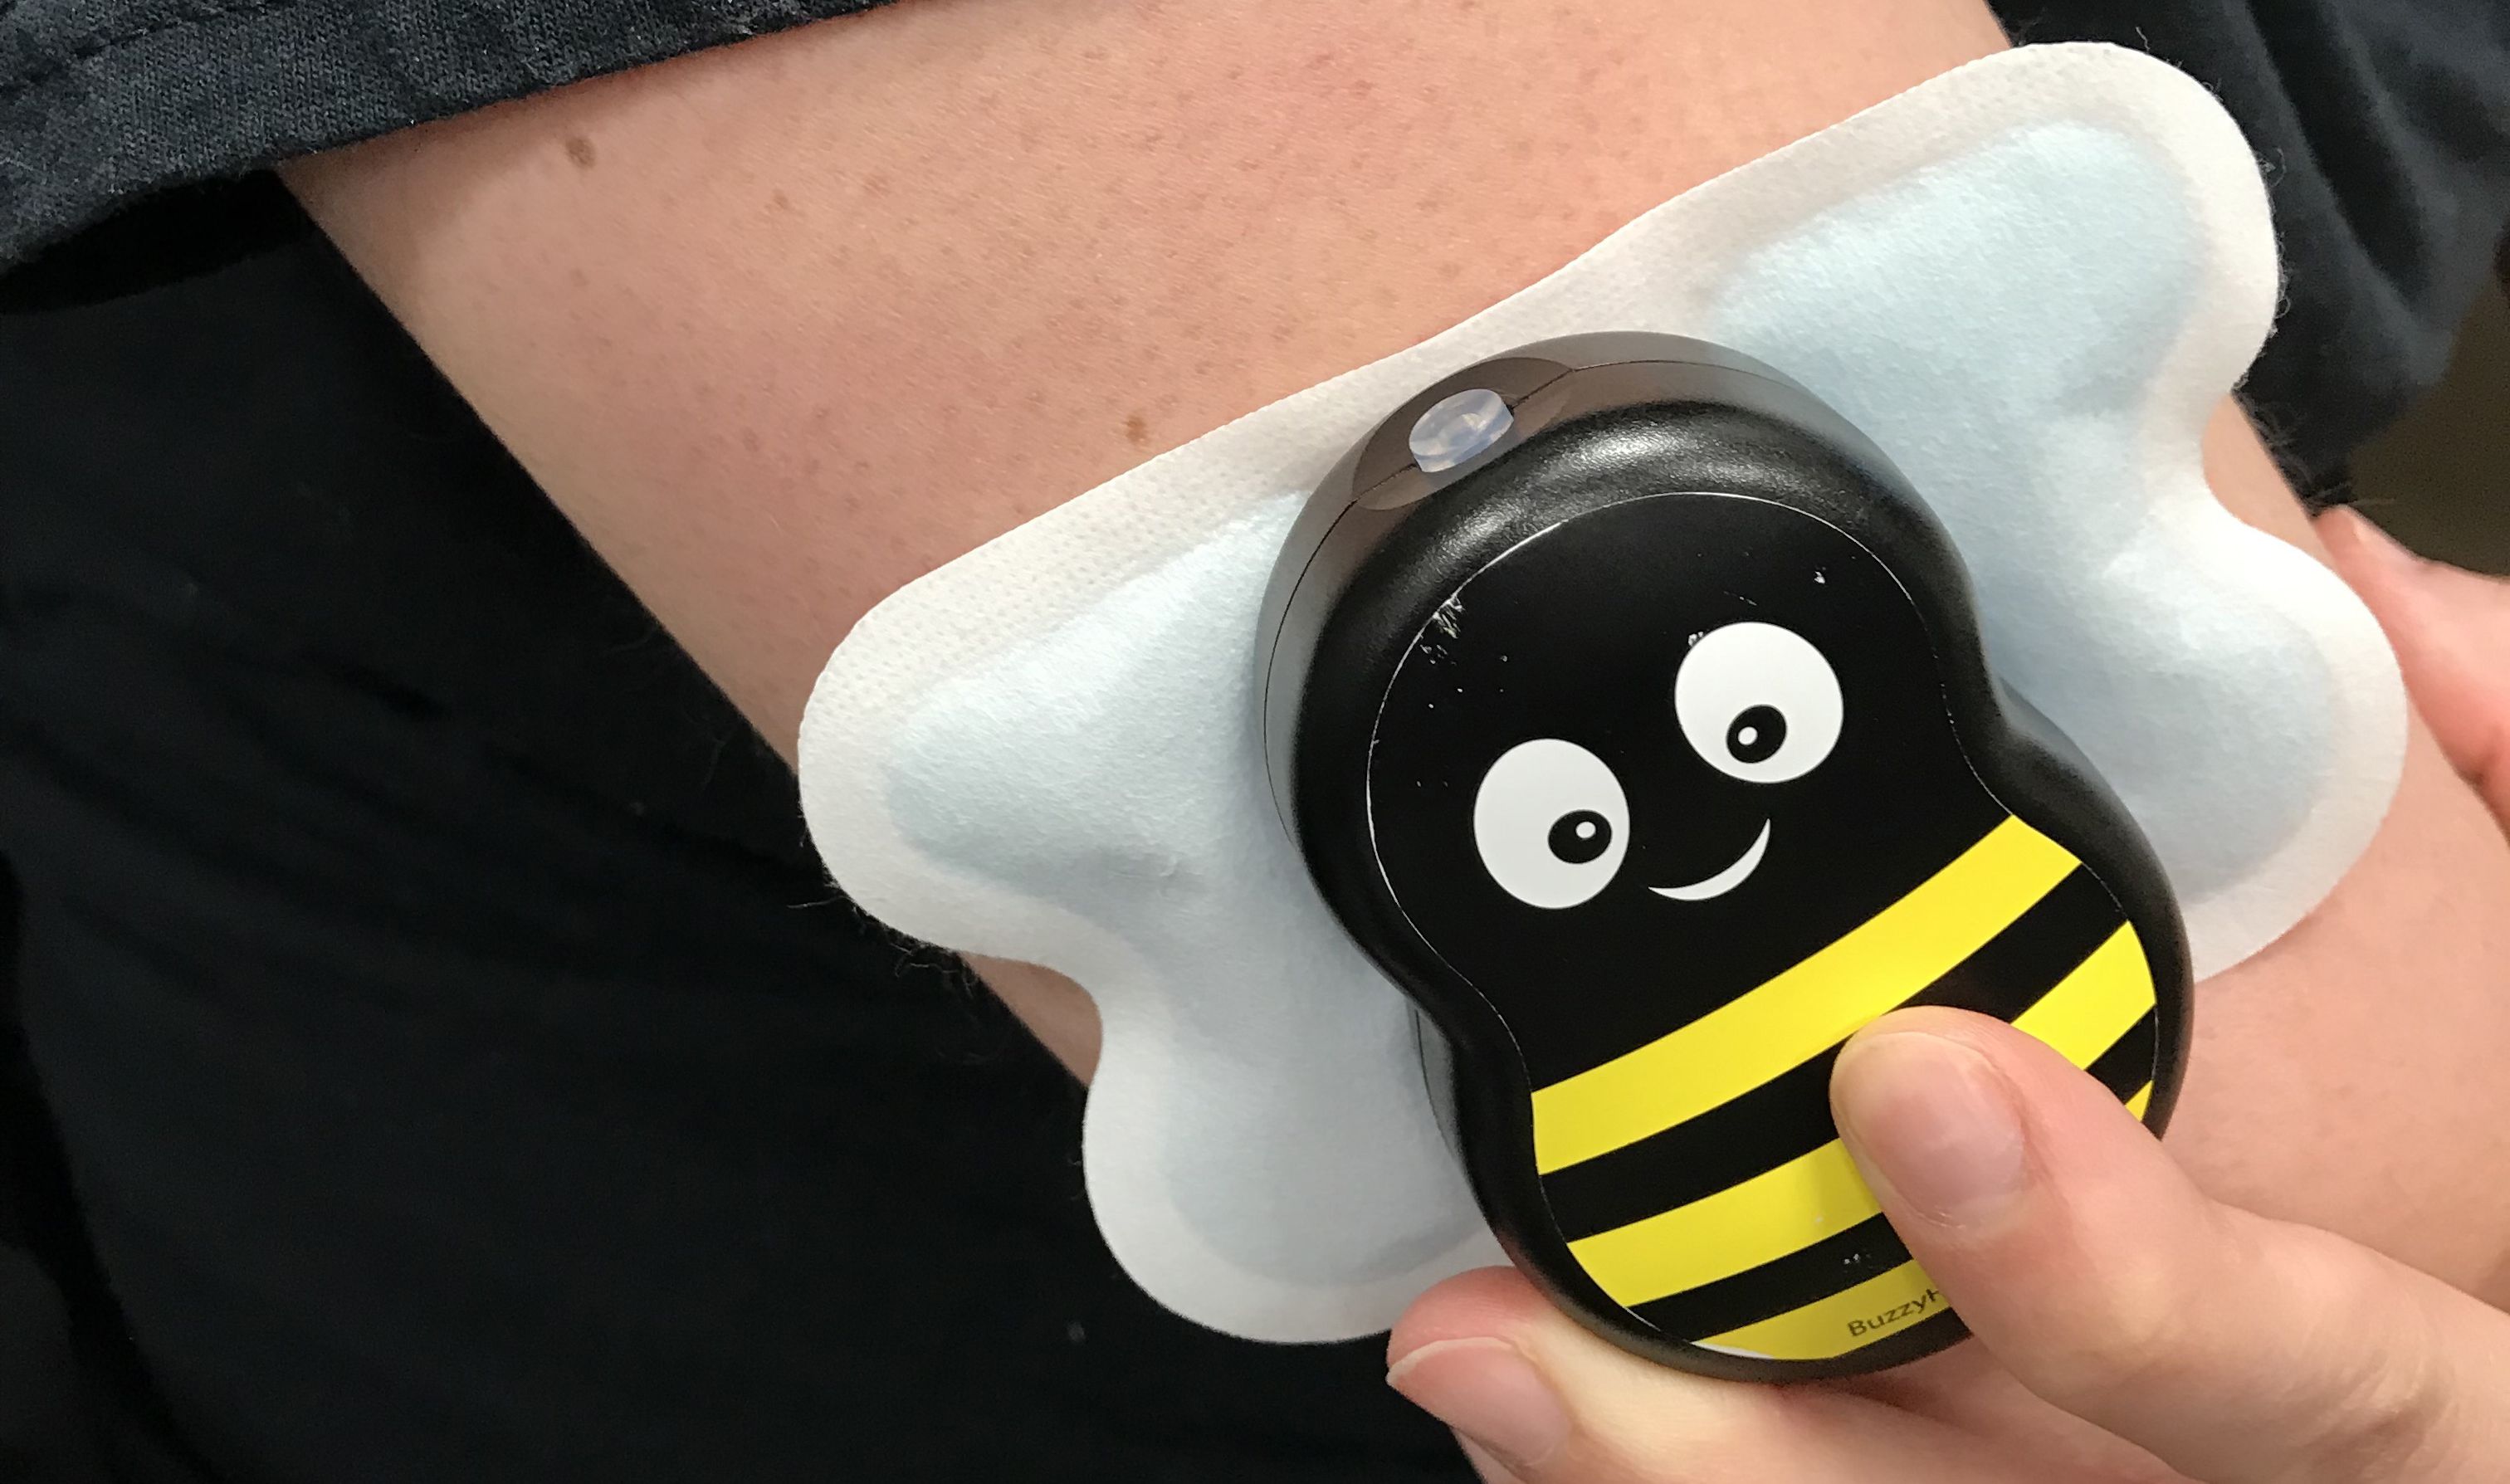 Buzzy, a new device that helps distract children from shots